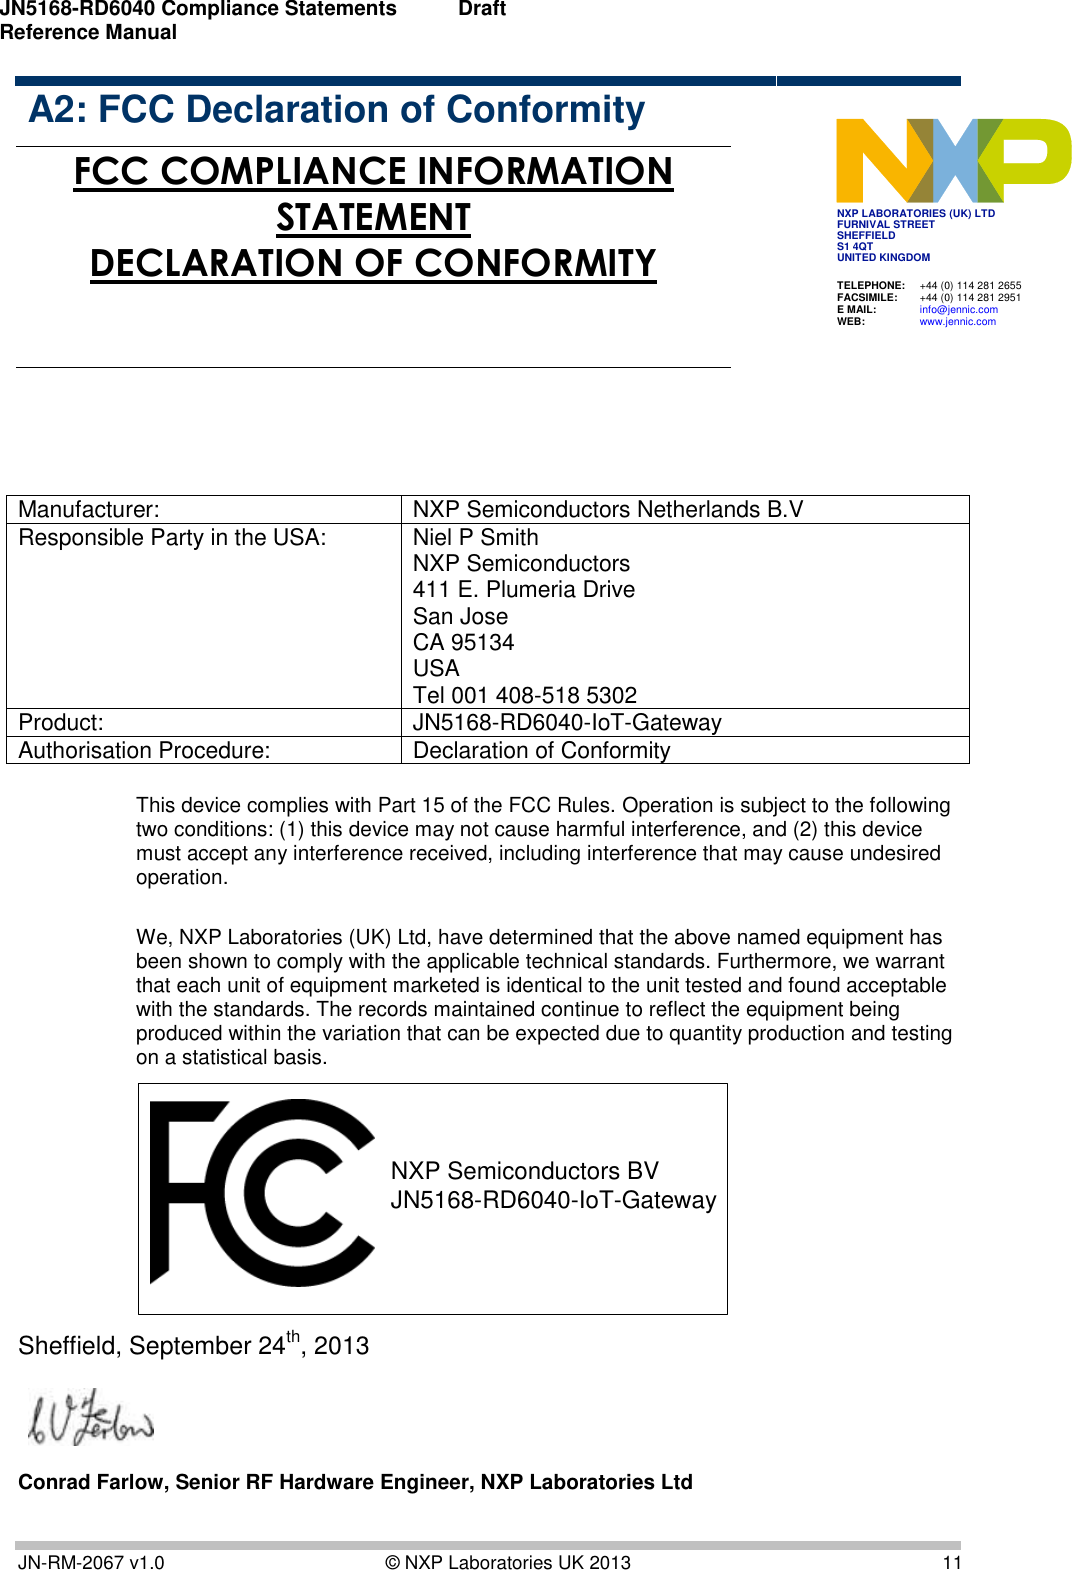 JN5168-RD6040 Compliance Statements Reference Manual   Draft   JN-RM-2067 v1.0  © NXP Laboratories UK 2013  11  A2: FCC Declaration of Conformity JN5139-000-M00 JN5139-000-M01 JN5139-000-M02 JN5139-000-M03 JN5139-000-M04  FCC COMPLIANCE INFORMATION STATEMENT DECLARATION OF CONFORMITY        Manufacturer: NXP Semiconductors Netherlands B.V Responsible Party in the USA: Niel P Smith NXP Semiconductors  411 E. Plumeria Drive San Jose  CA 95134 USA Tel 001 408-518 5302 Product: JN5168-RD6040-IoT-Gateway Authorisation Procedure: Declaration of Conformity  This device complies with Part 15 of the FCC Rules. Operation is subject to the following two conditions: (1) this device may not cause harmful interference, and (2) this device must accept any interference received, including interference that may cause undesired operation.  We, NXP Laboratories (UK) Ltd, have determined that the above named equipment has been shown to comply with the applicable technical standards. Furthermore, we warrant that each unit of equipment marketed is identical to the unit tested and found acceptable with the standards. The records maintained continue to reflect the equipment being produced within the variation that can be expected due to quantity production and testing on a statistical basis.  NXP Semiconductors BVJN5168-RD6040-IoT-Gateway Sheffield, September 24th, 2013                       Conrad Farlow, Senior RF Hardware Engineer, NXP Laboratories Ltd TELEPHONE:  +44 (0) 114 281 2655 FACSIMILE:  +44 (0) 114 281 2951 E MAIL:  info@jennic.com WEB:  www.jennic.com  NXP LABORATORIES (UK) LTD FURNIVAL STREET SHEFFIELD S1 4QT UNITED KINGDOM  